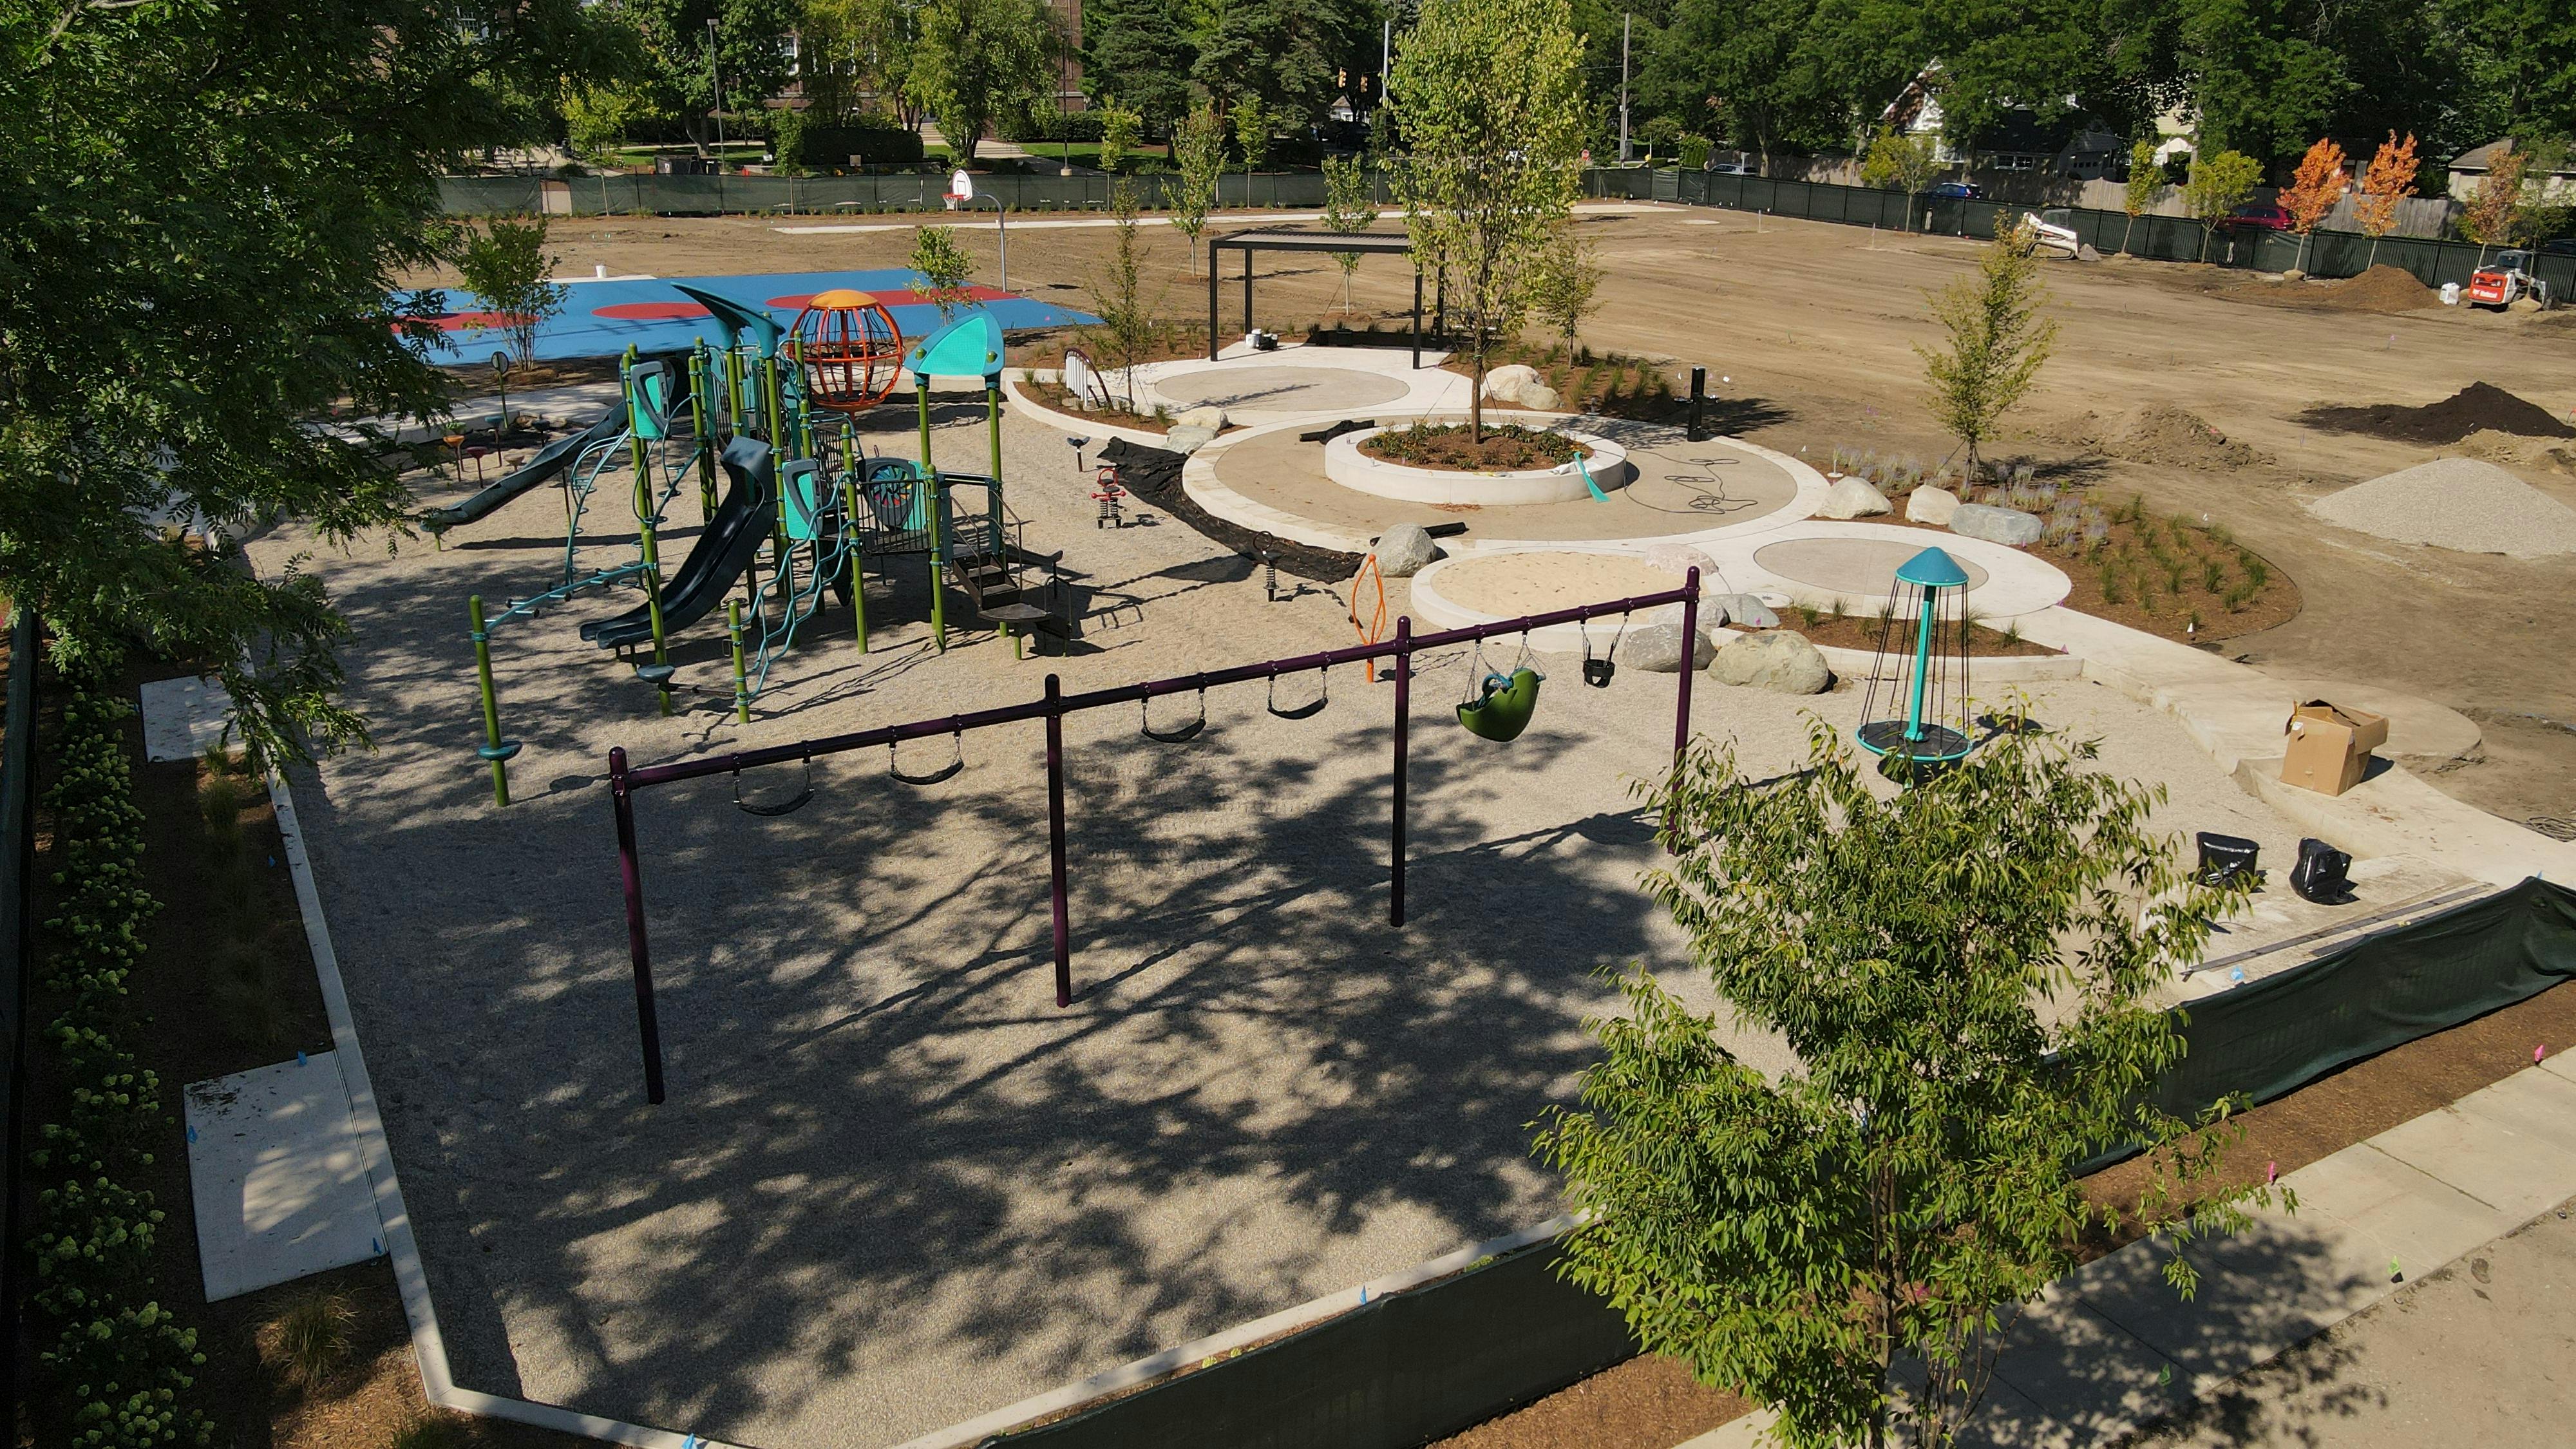 The playground equipment is installed and they are working on the base material.